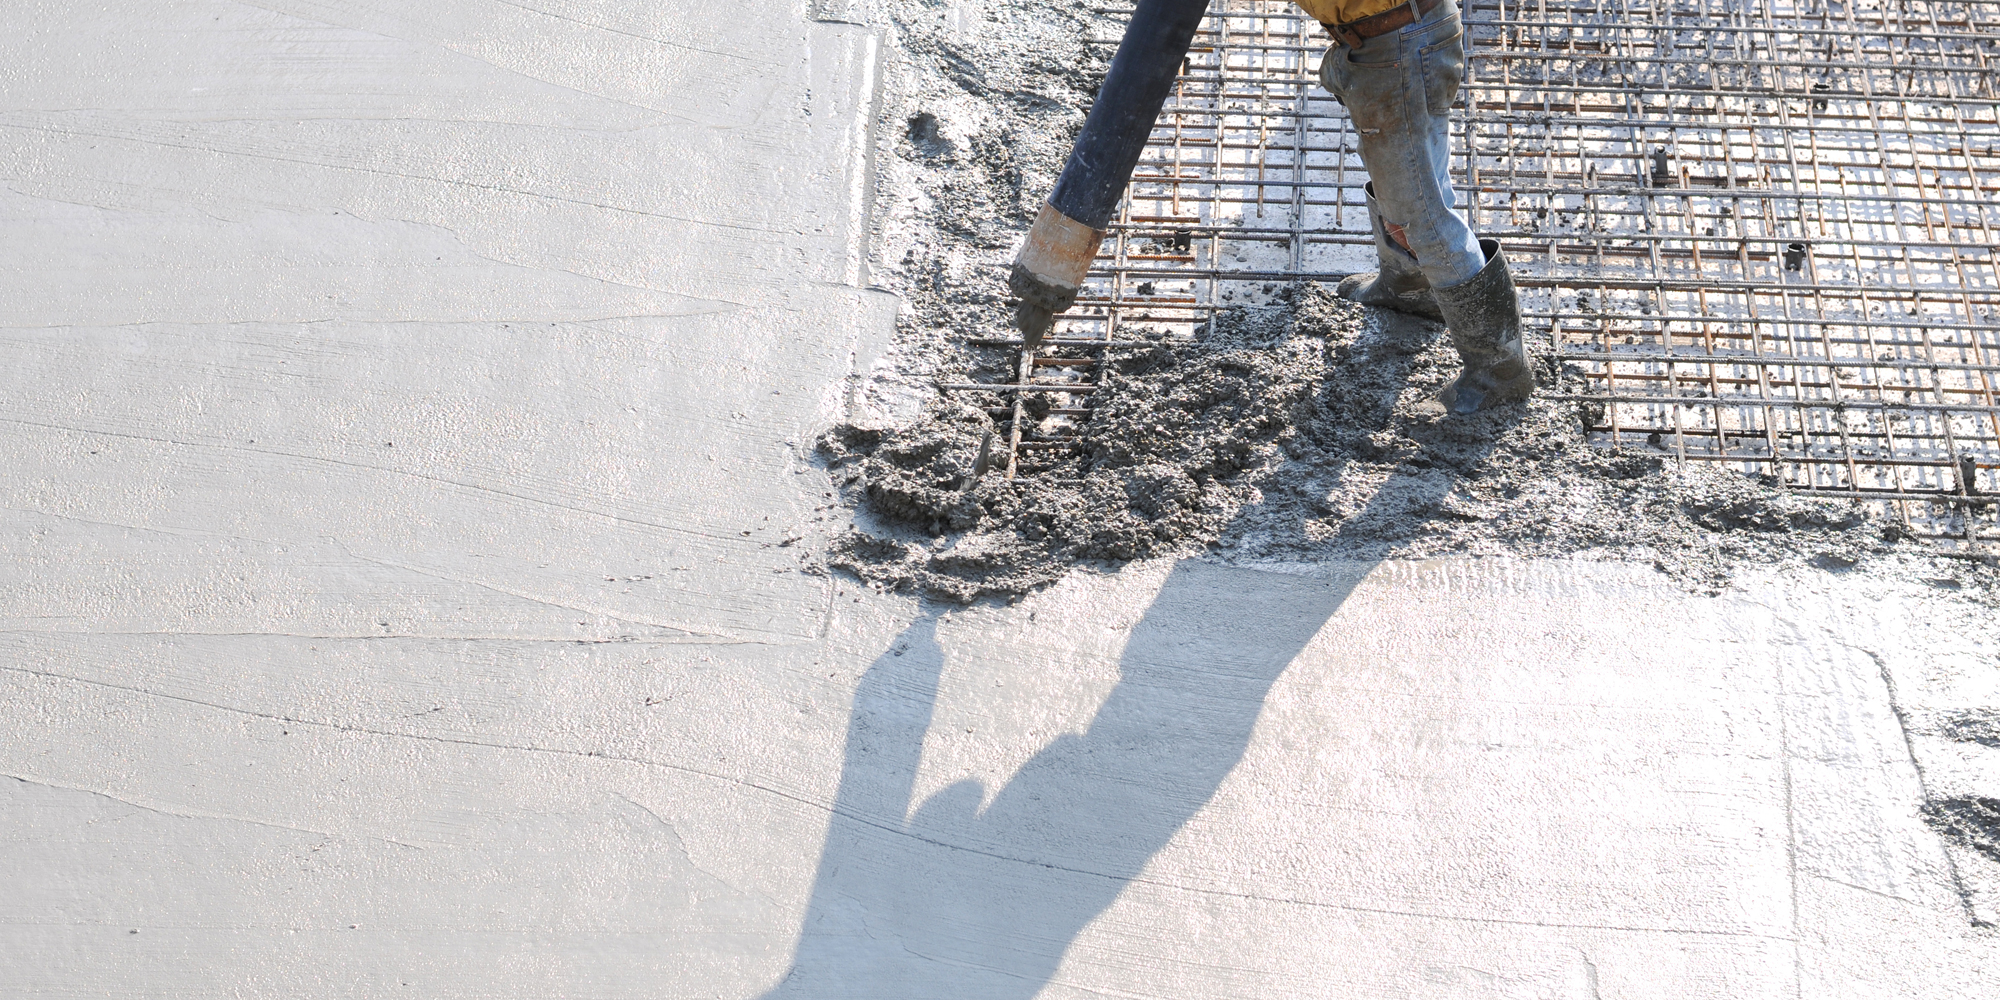 Concrete Pouring During Commercial Concreting Floors Of Building